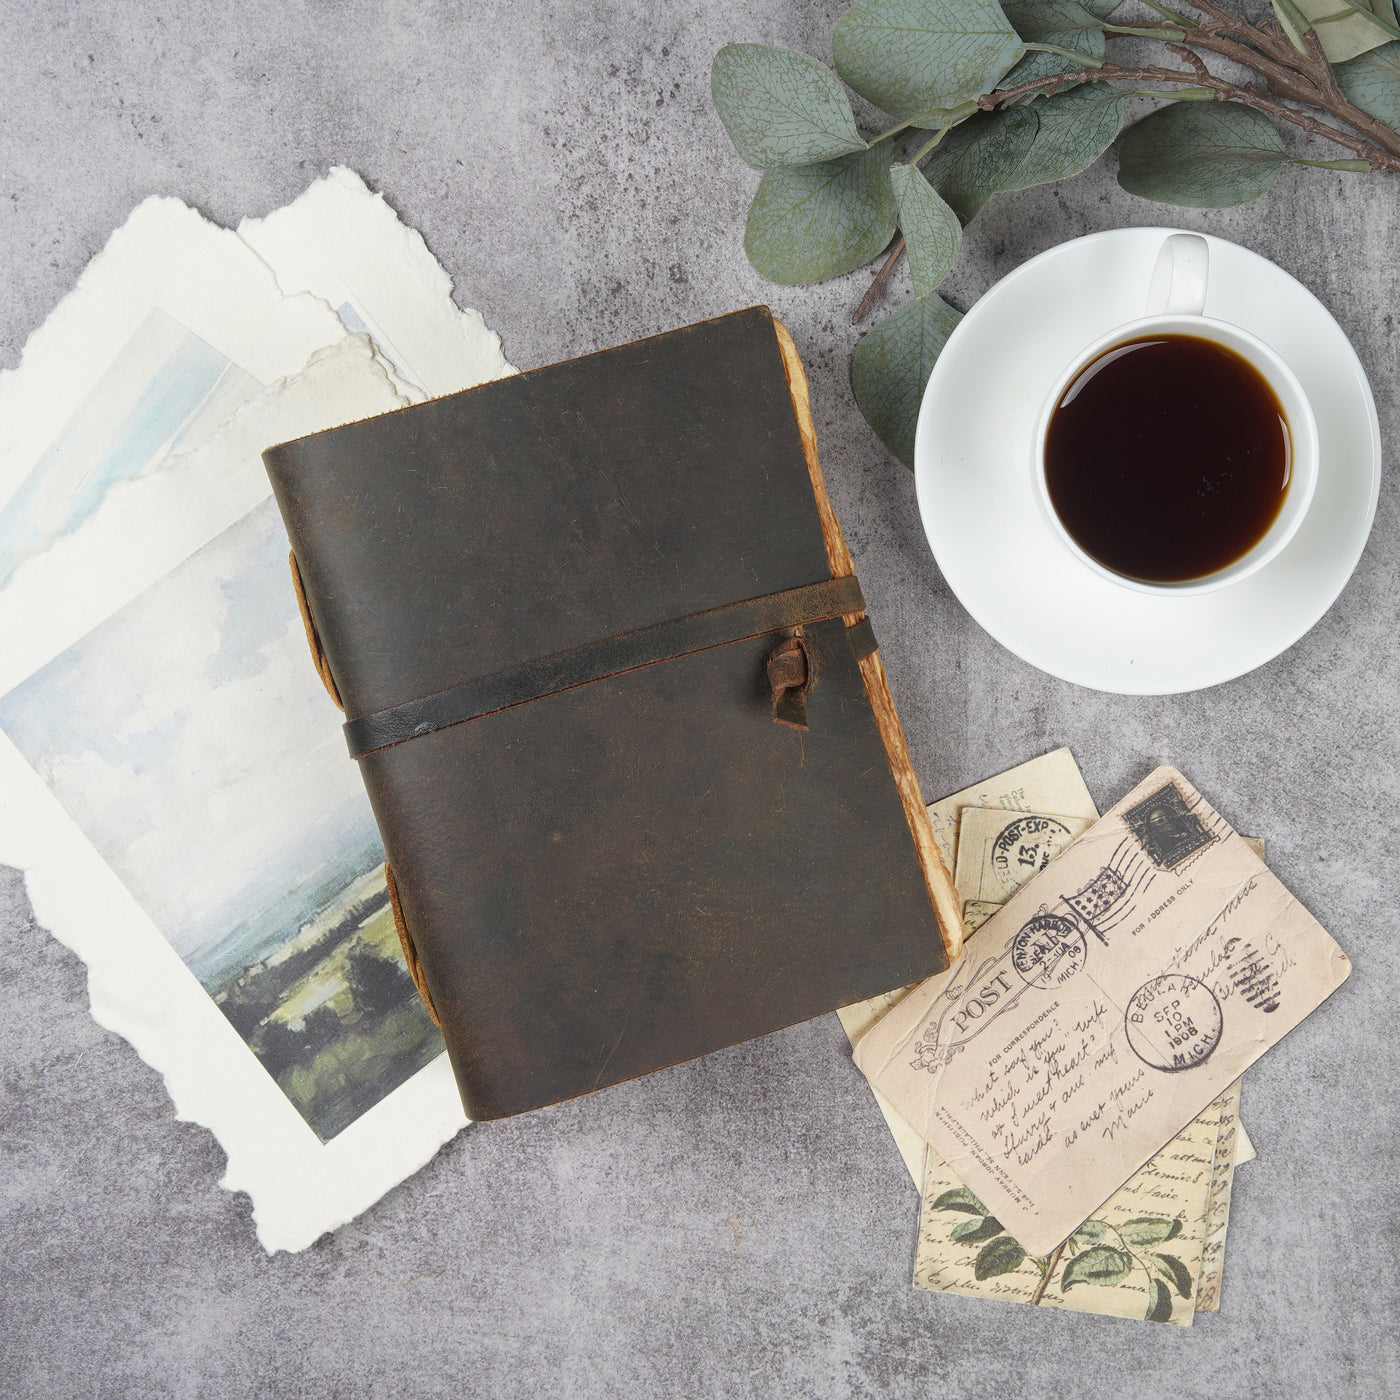 BROWN LEATHER BOUND JOURNAL - DECKLE EDGE WATERCOLOR PAPER